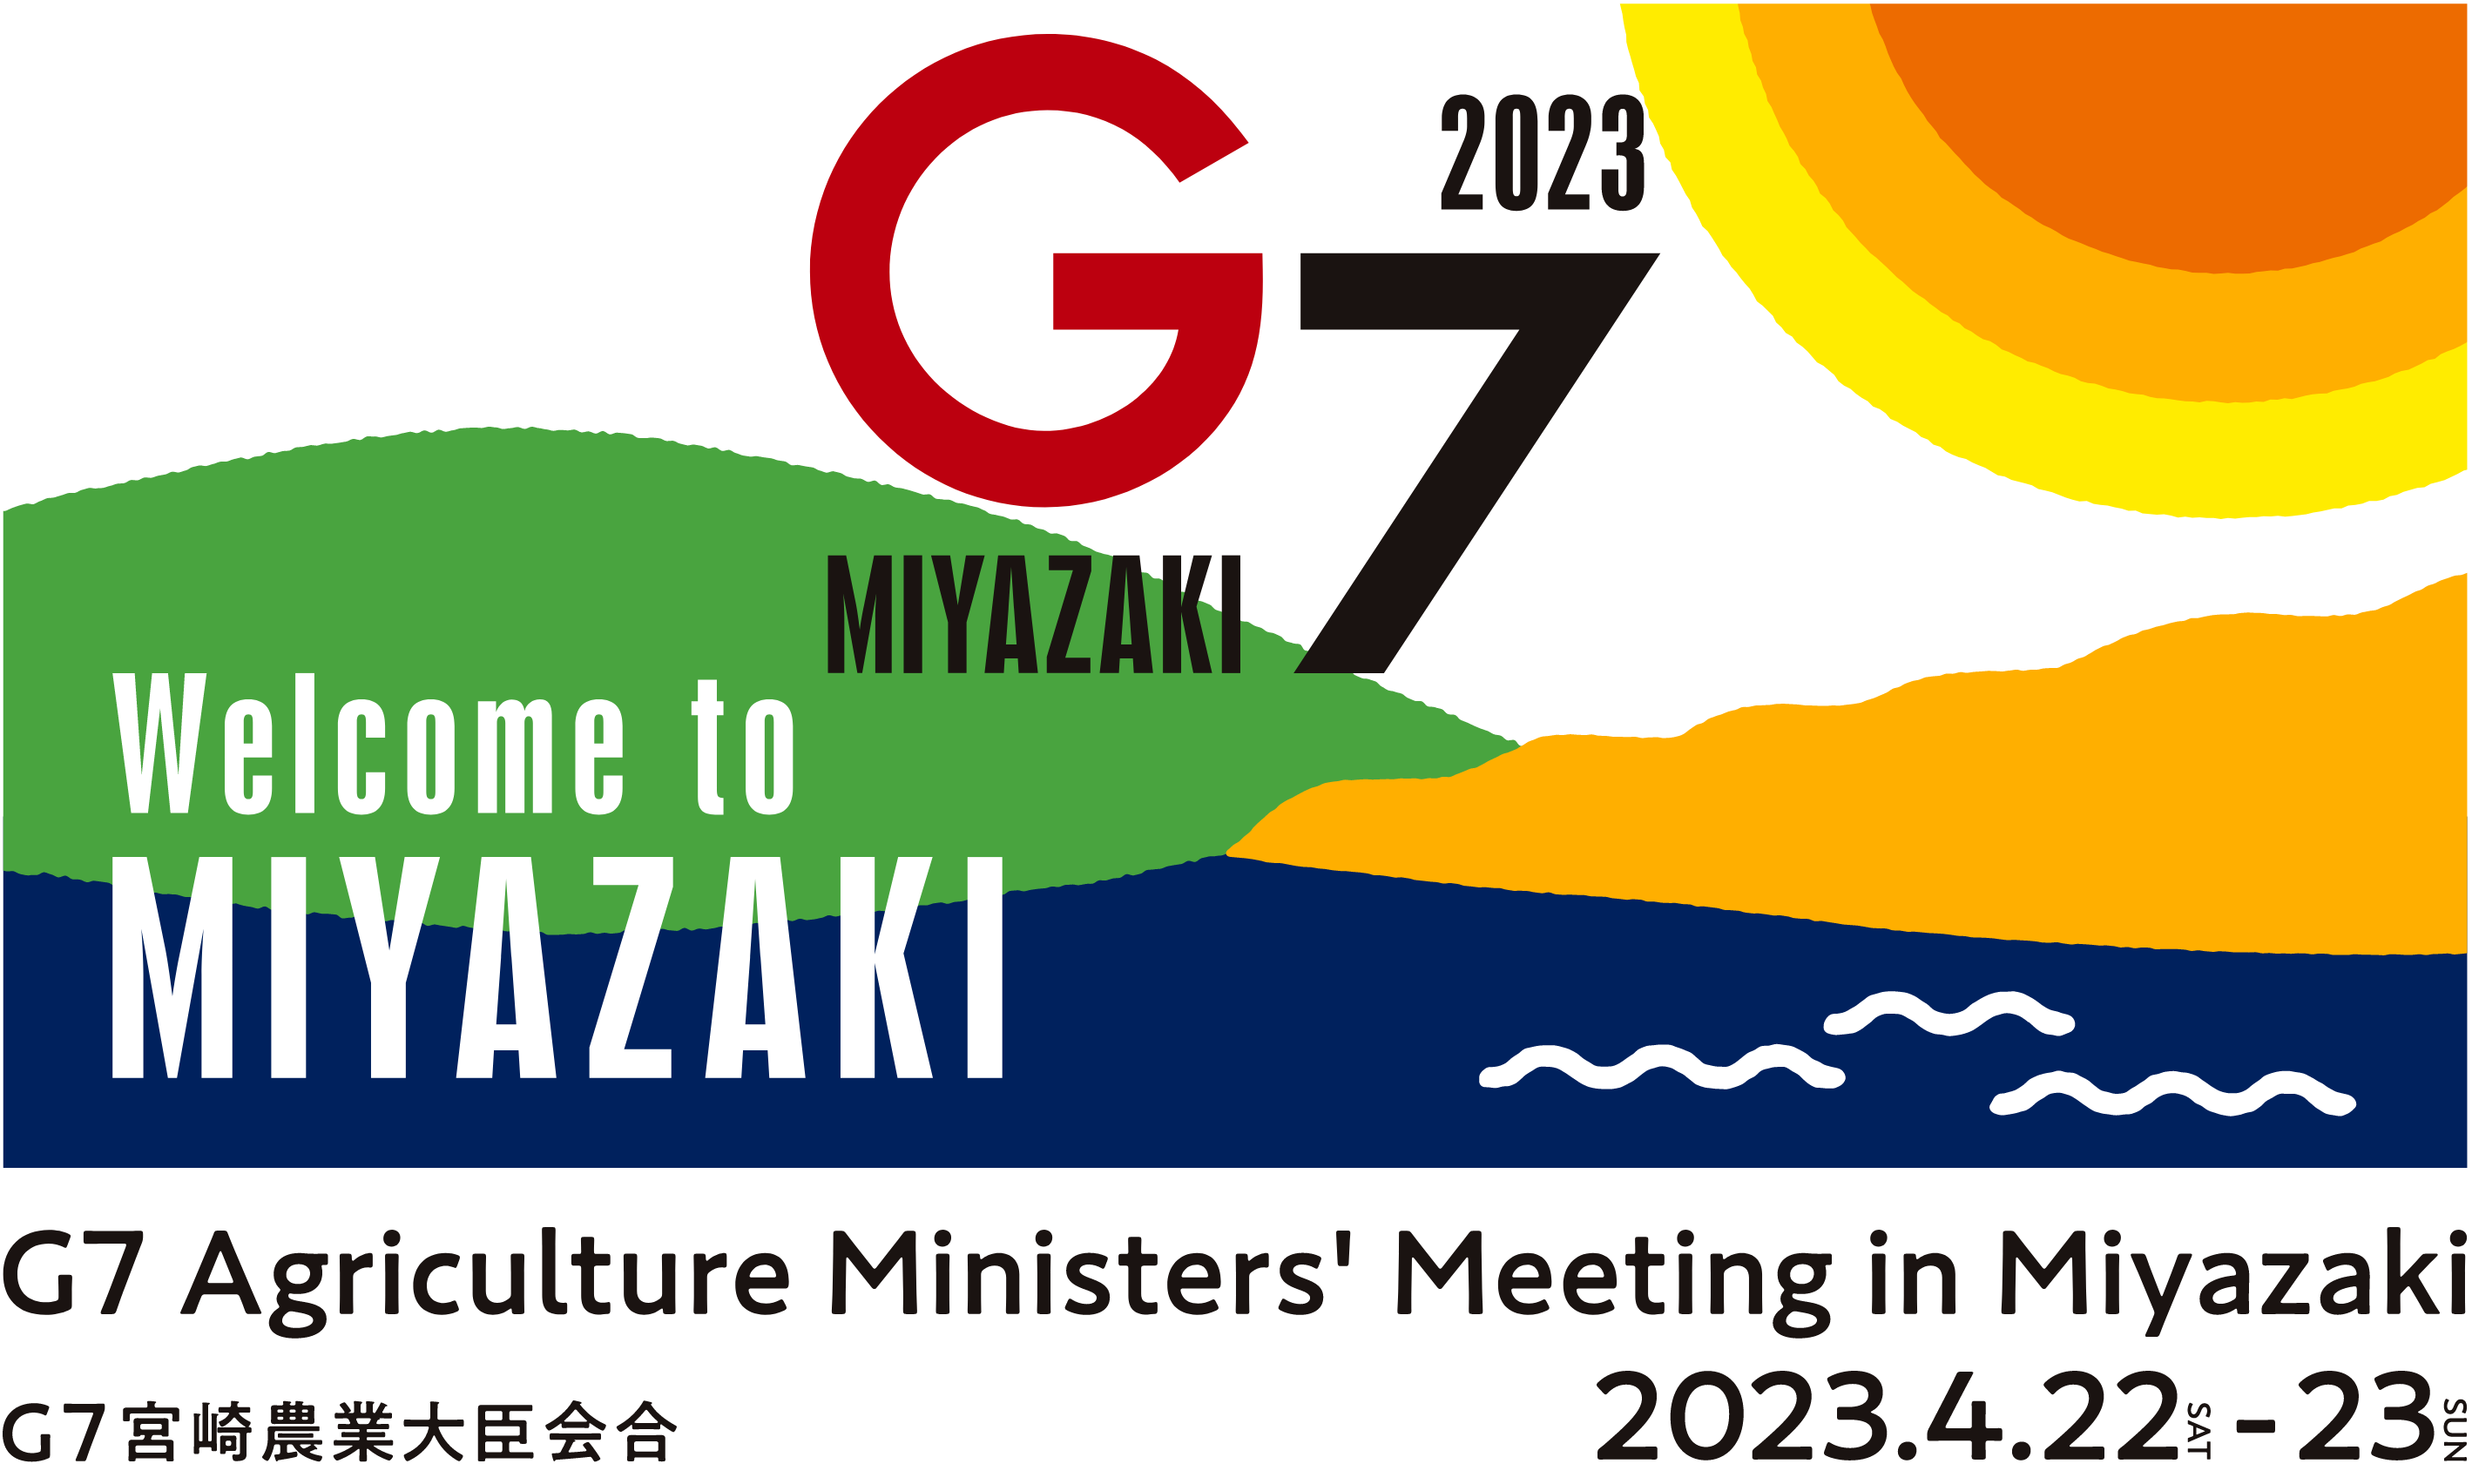 Welcome to Miyazaki,G7 Agriculture Ministers’ Meeting in Miyazaki.The meeting will be held on April 22 and 23, 2023, at the Seagaia Convention Center in Miyazaki City.